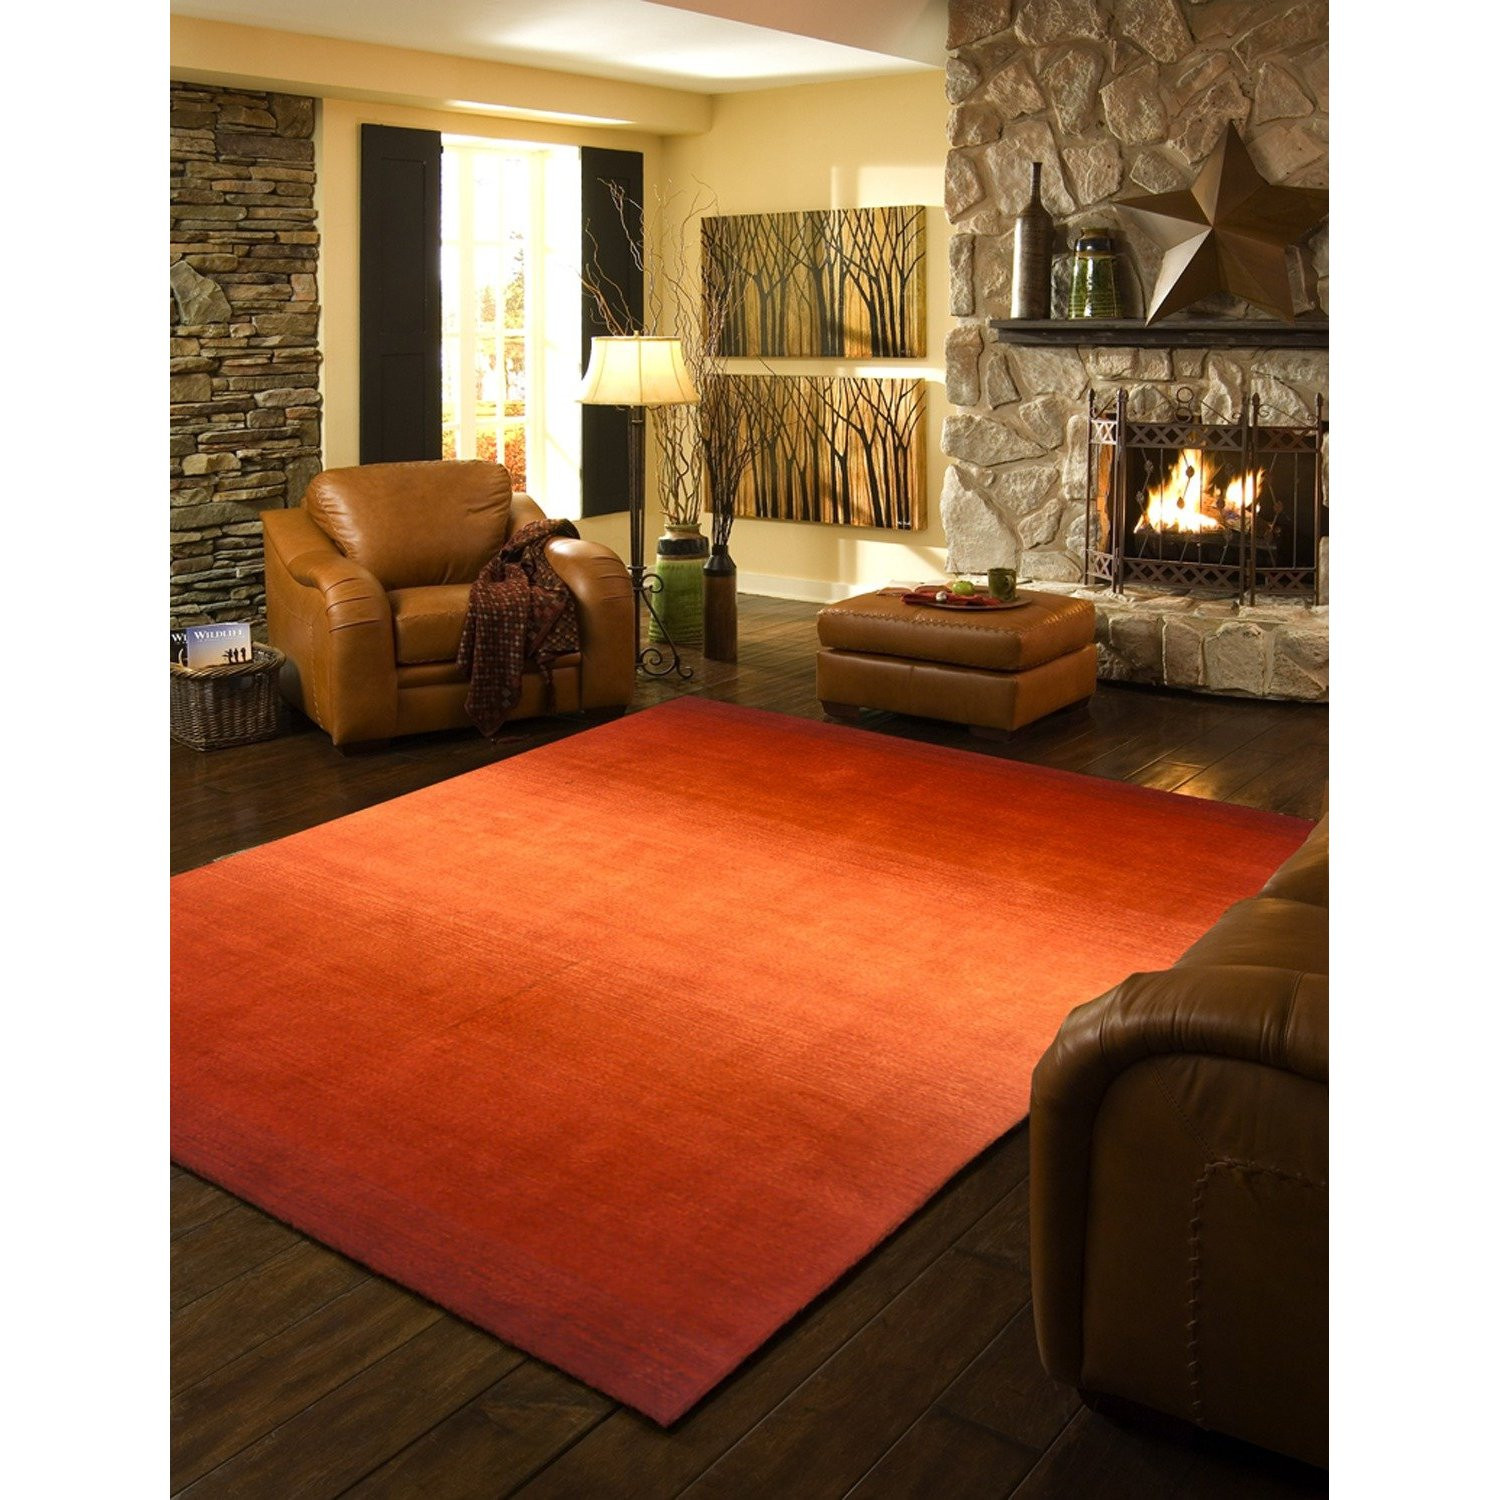 Orange Rugs For Living Room
 Mad for Mid Century Orange Rug for a Mid Century Ranch